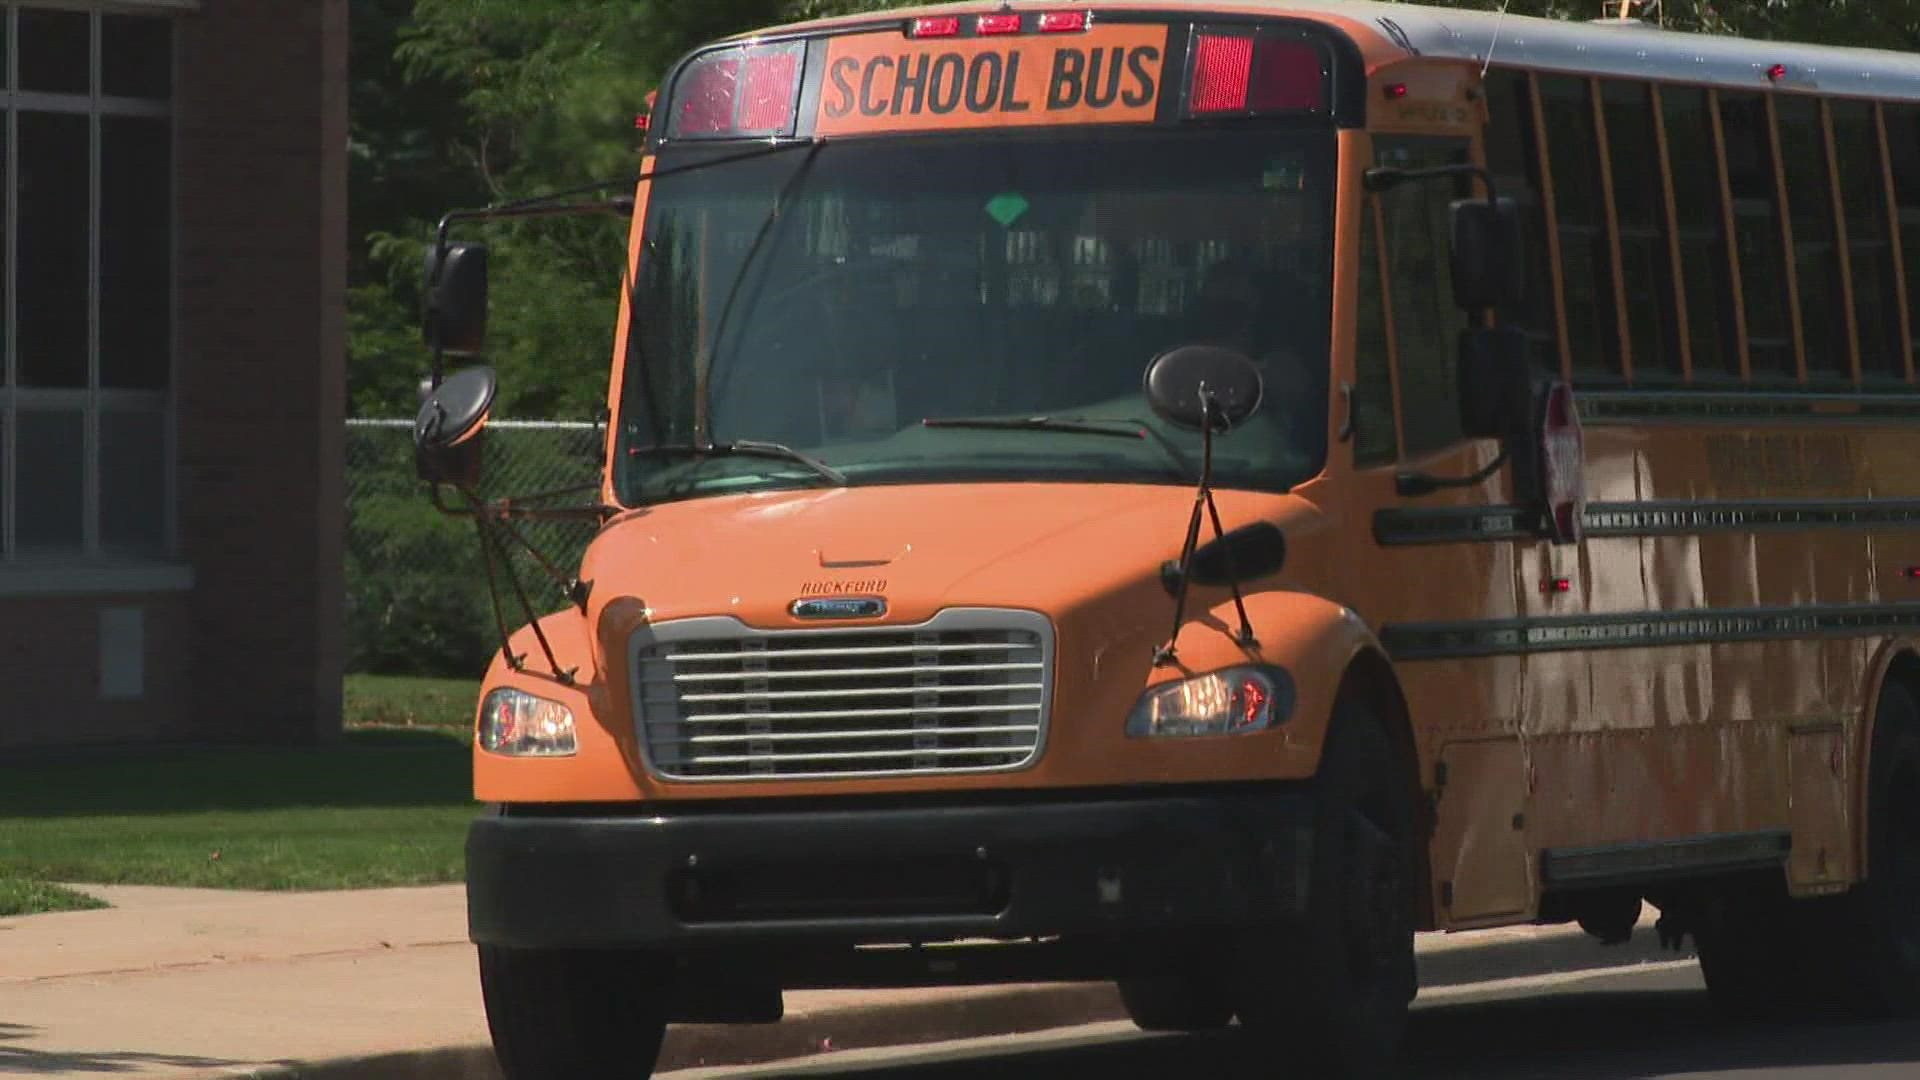 Several school districts in West Michigan have shortened school days due to the excessive heat.